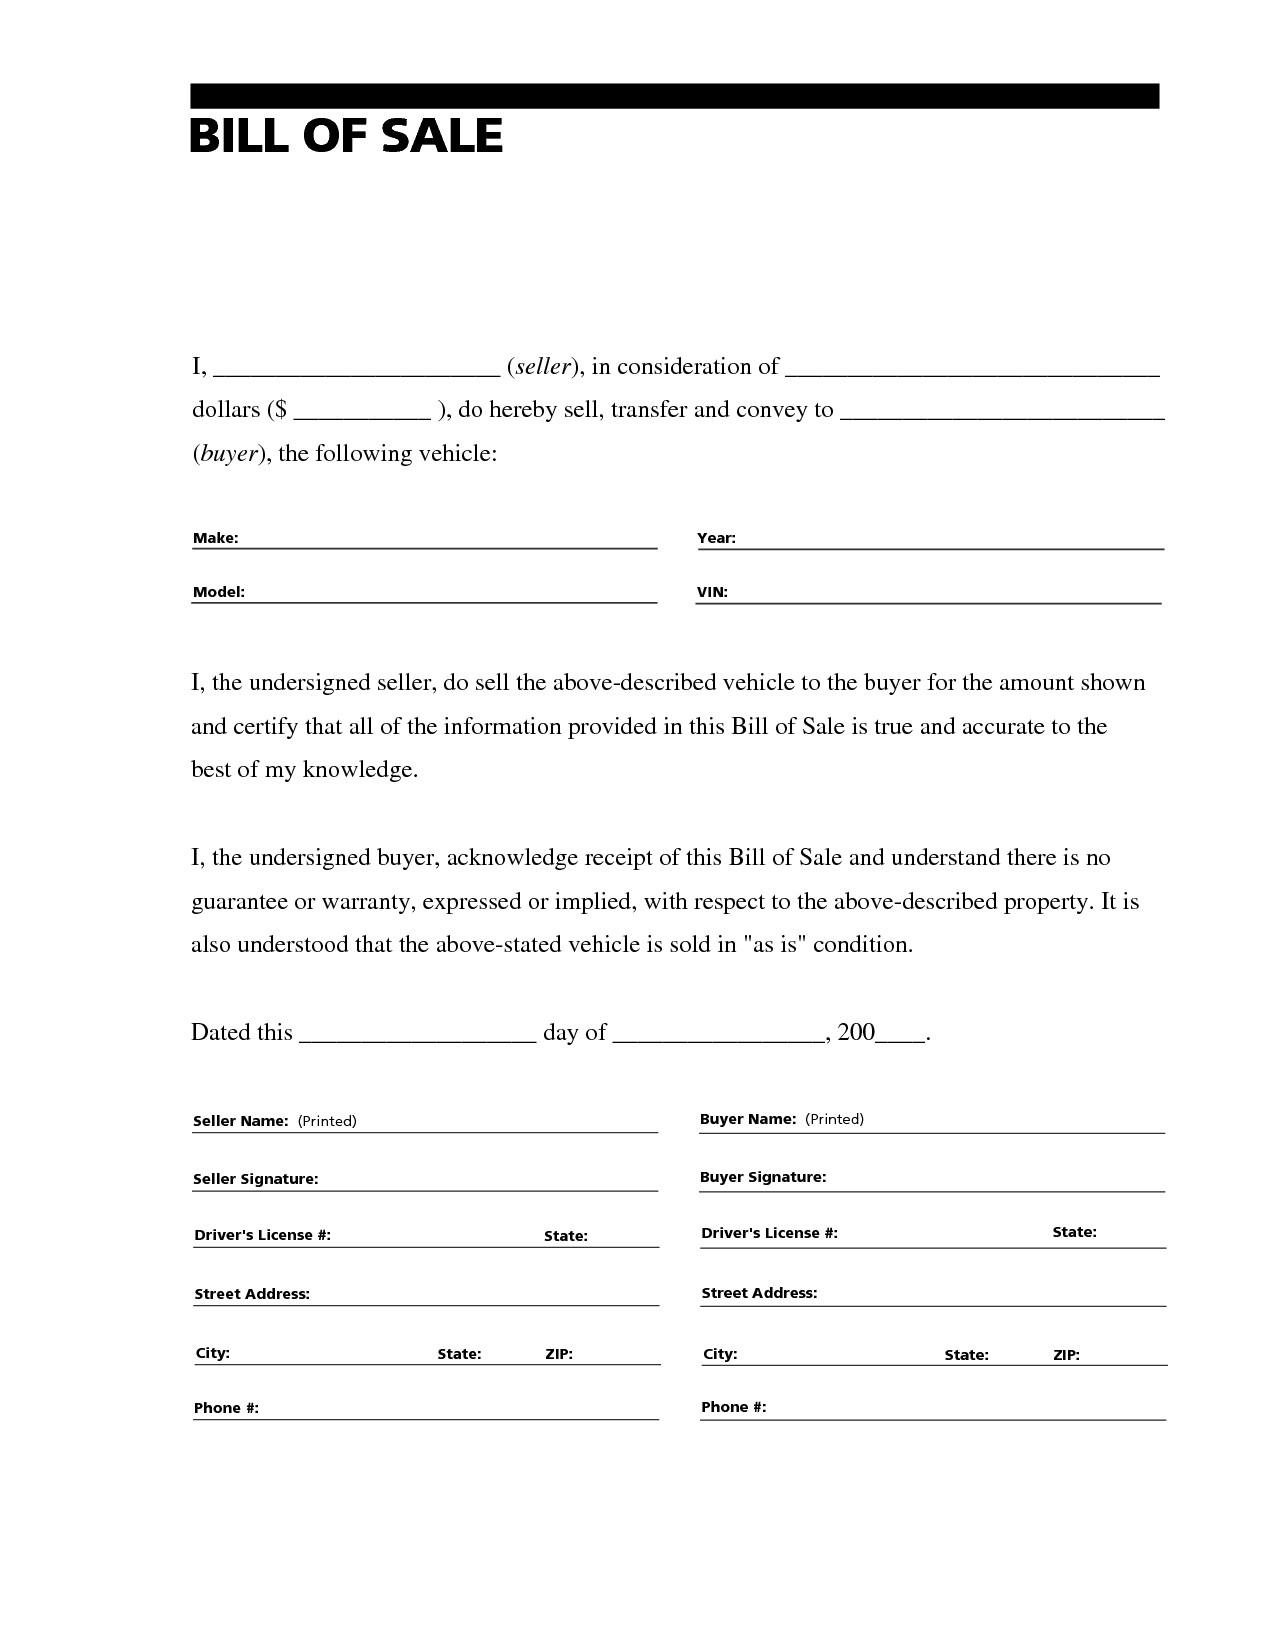 Free Printable Last Will And Testament Blank Forms Florida | Mbm Legal - Free Printable Will Forms